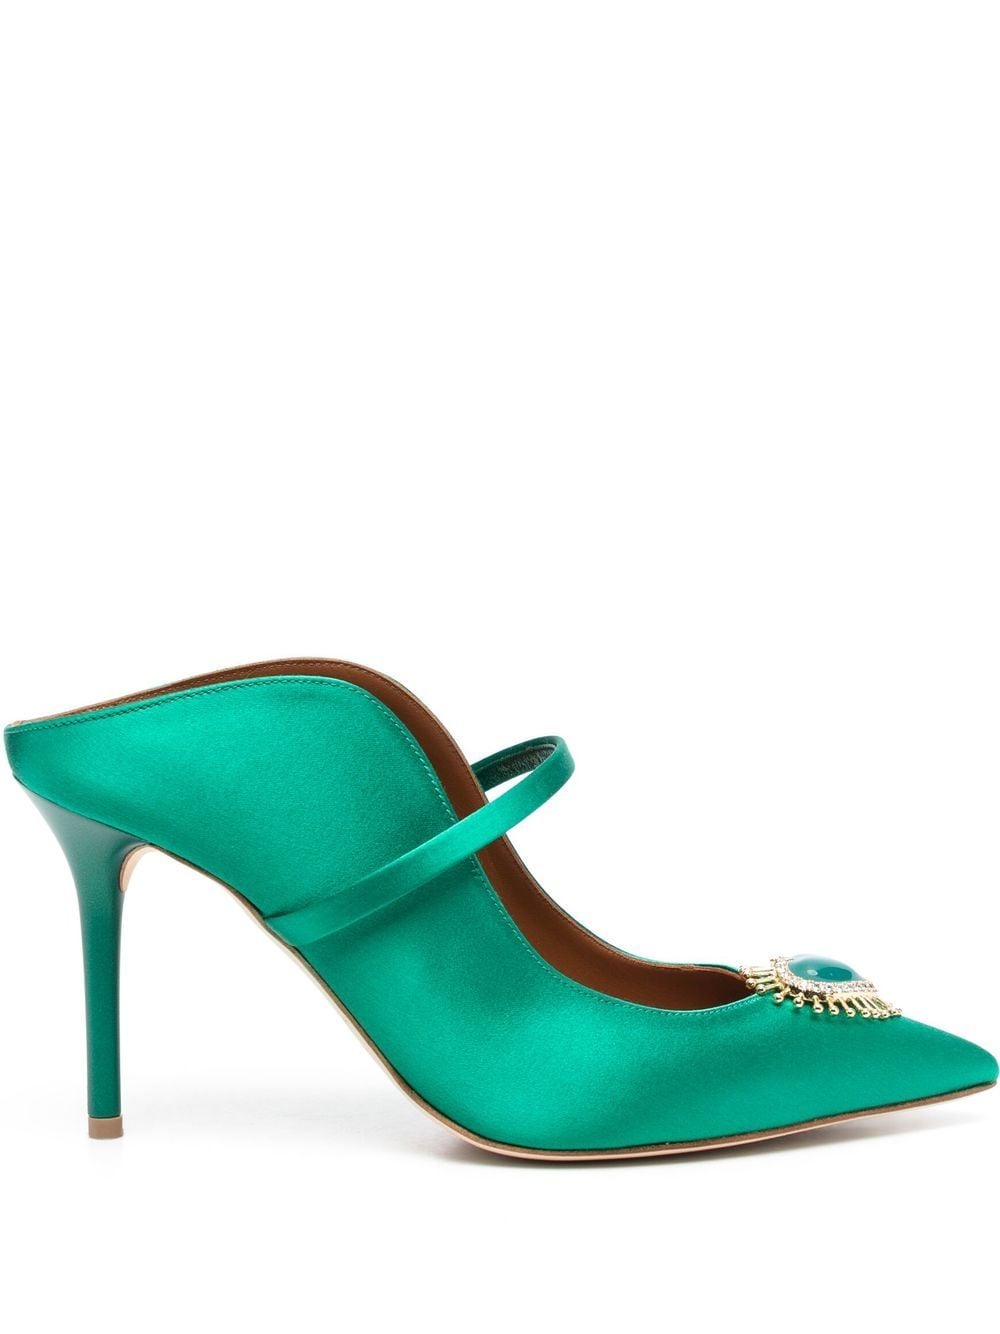 Malone Souliers Maureen 90mm mules - Green von Malone Souliers